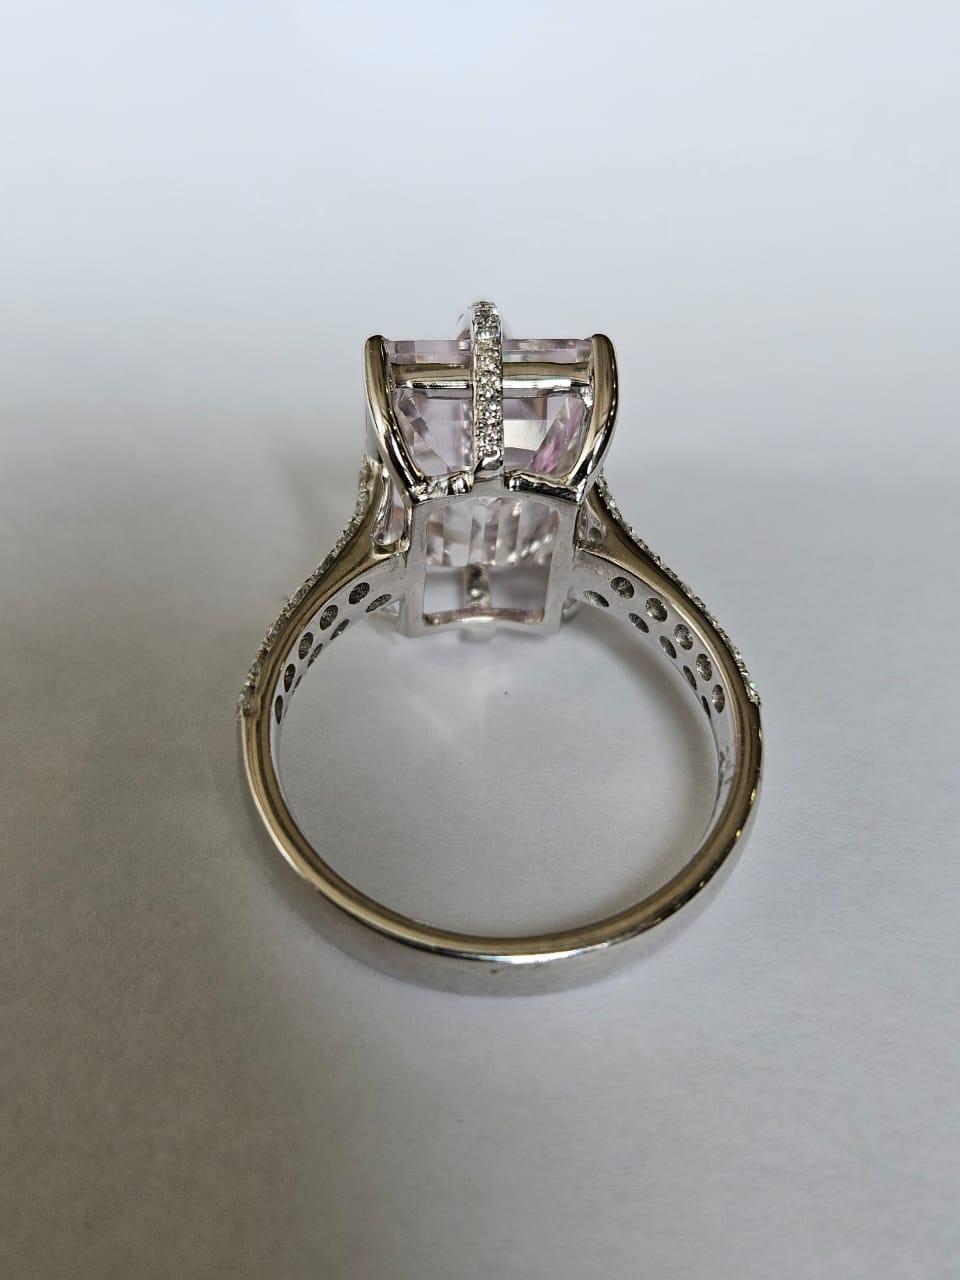 Modern Set in 18K Gold, 6.69 carats, Morganite, Pink Sapphire & Diamond Engagement Ring For Sale